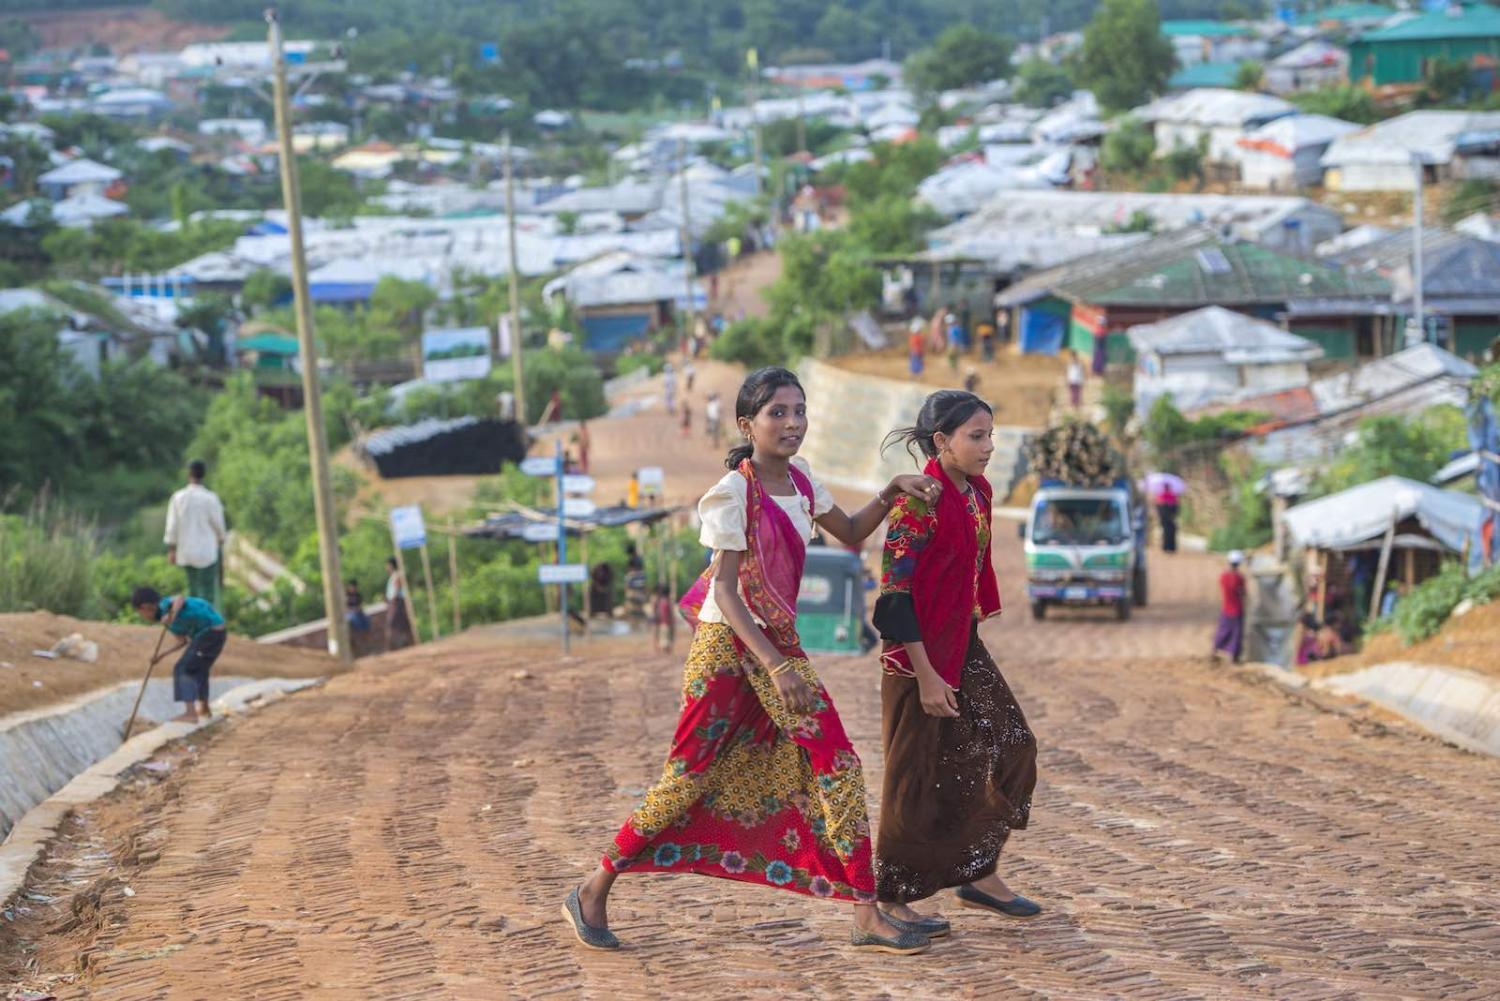 Sprawling camps around Cox’s Bazar make up the world’s largest refugee settlement (Photo: Peter Biro/European Union)